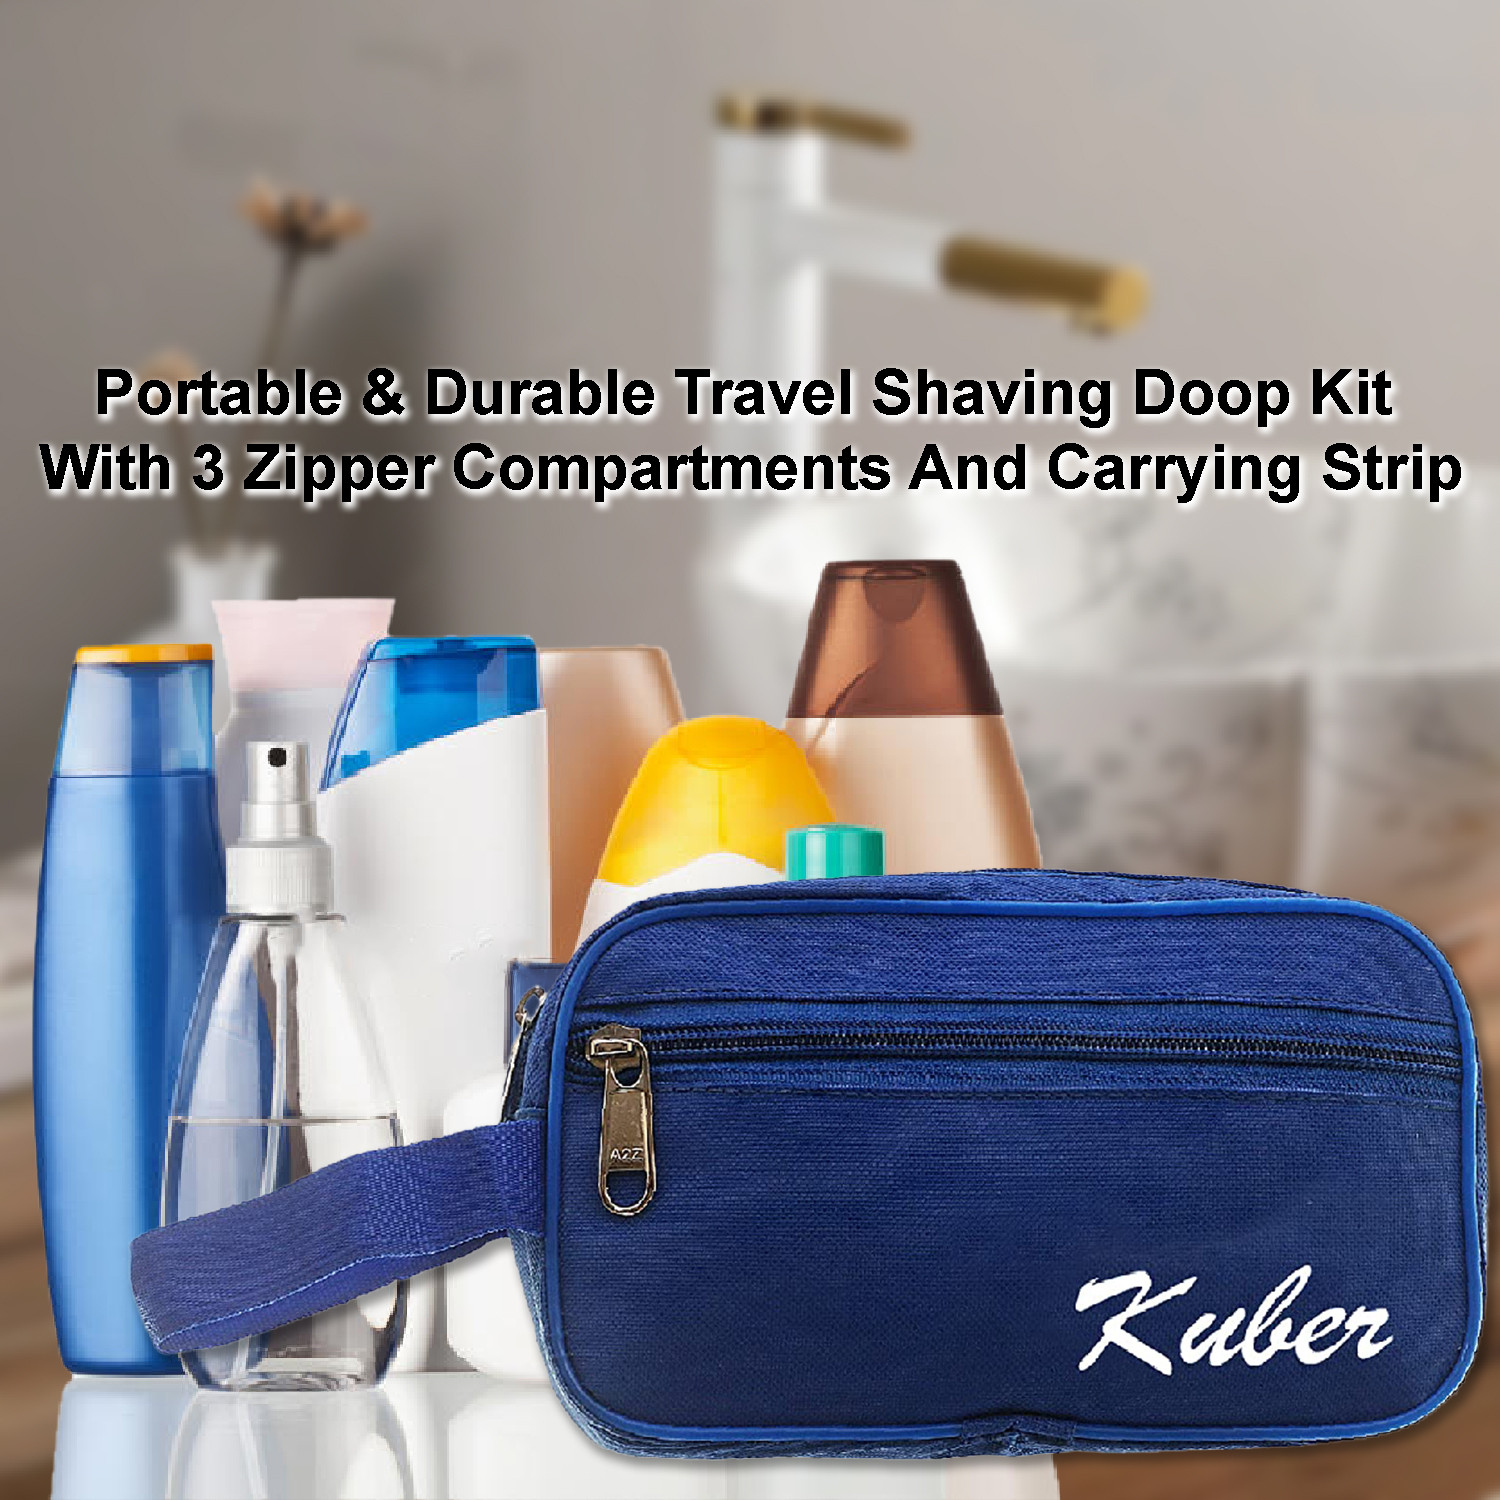 Kuber Industries Canvas Toiletry Organizer|Waterproof & Portable Travel Shaving Dopp Kit With 2 Main ComparMants And Front Zipper (Navy Blue)